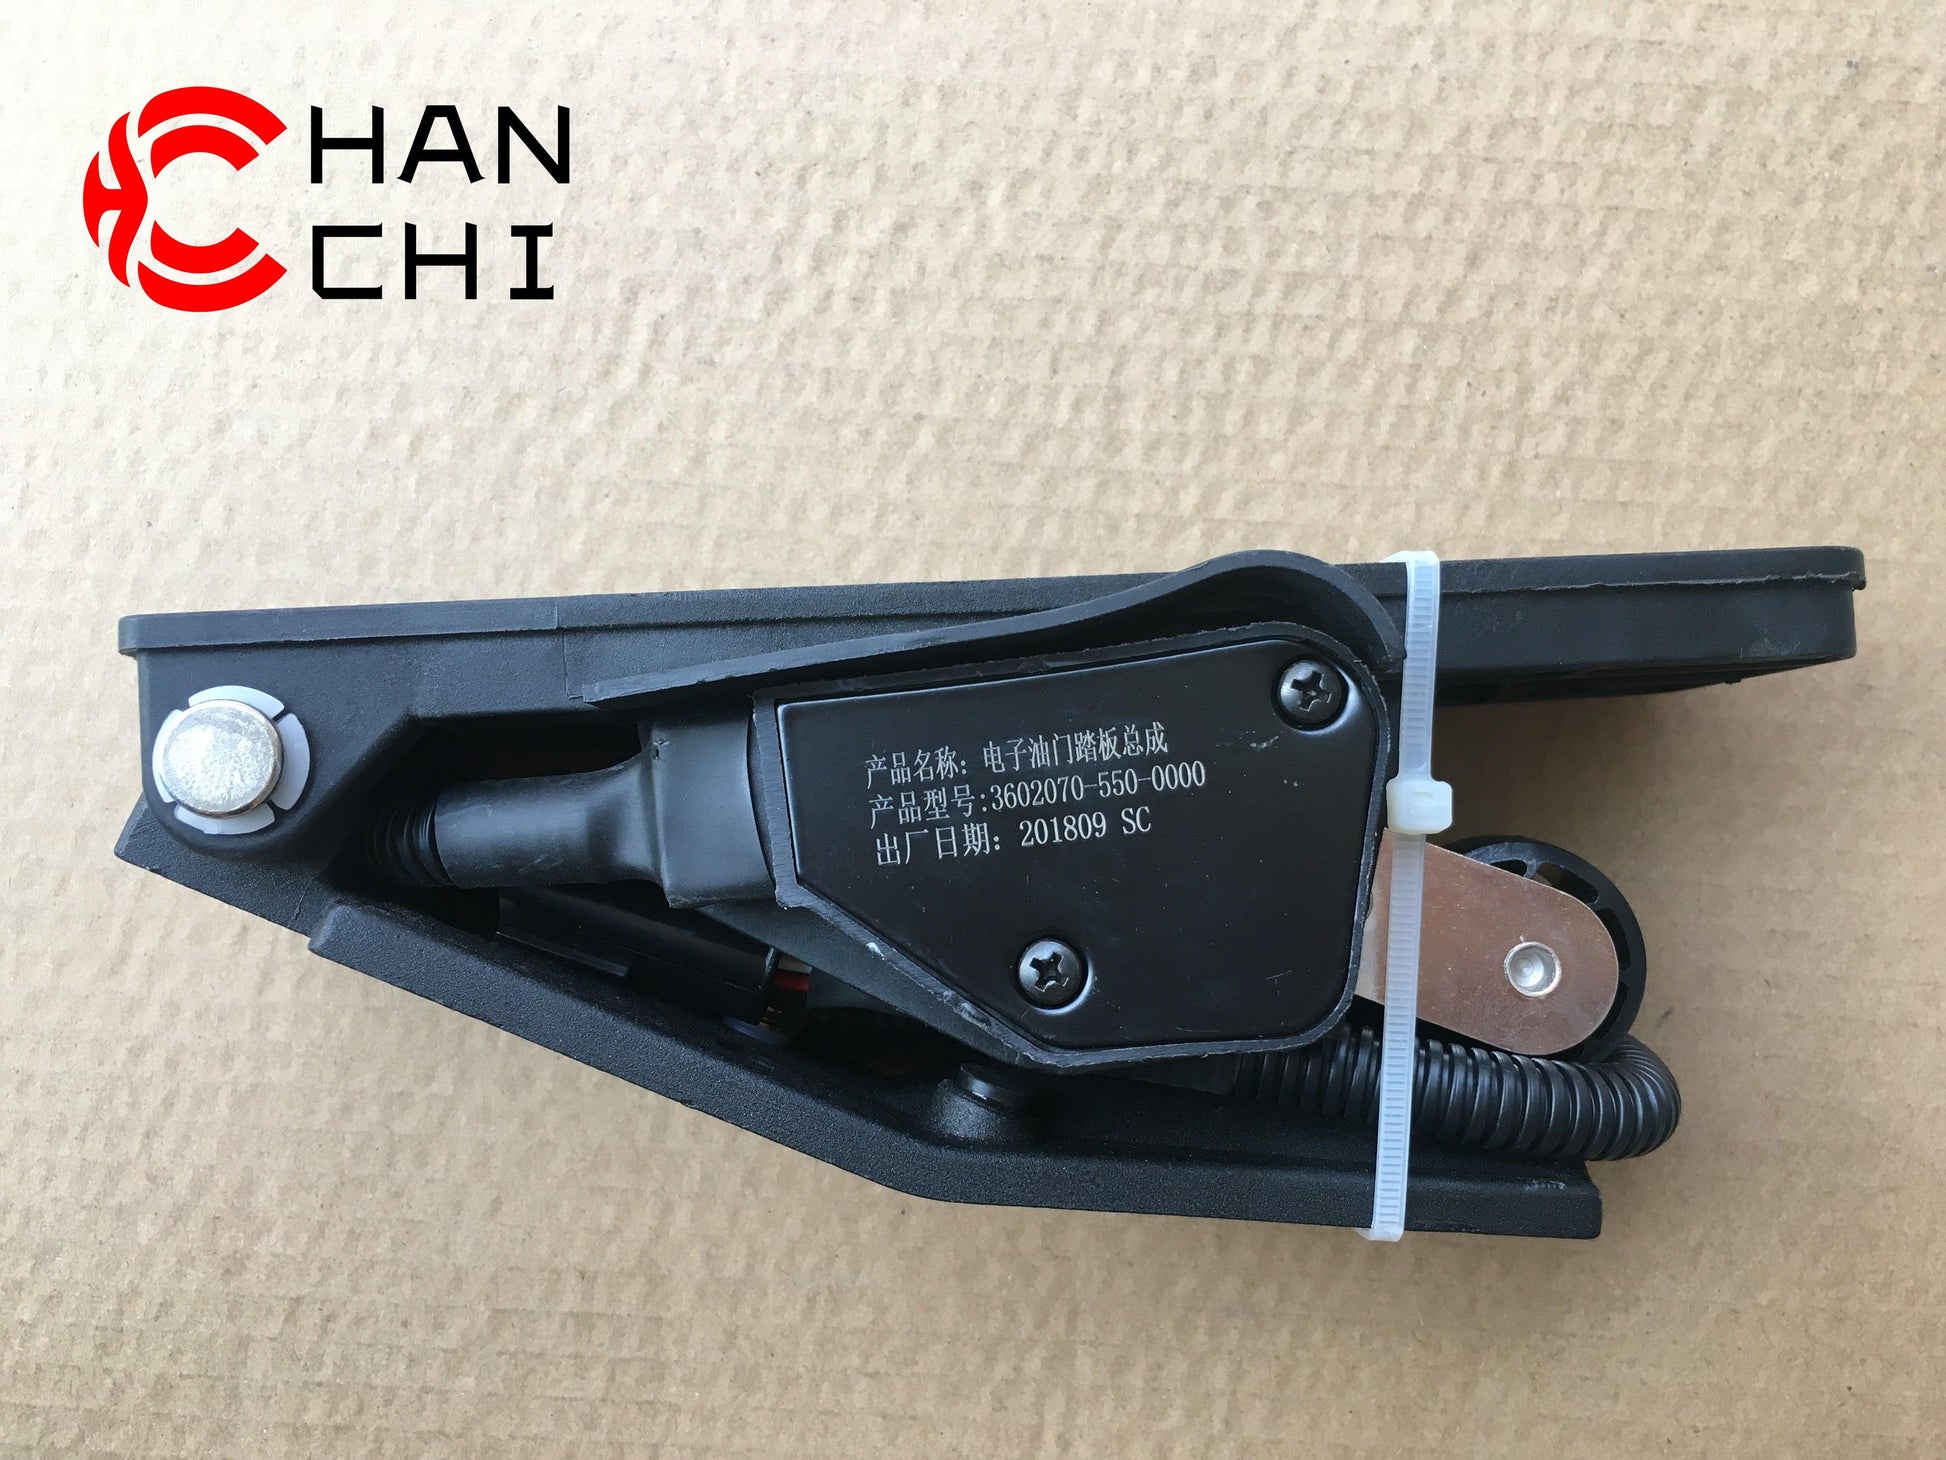 【Description】---☀Welcome to HANCHI☀---✔Good Quality✔Generally Applicability✔Competitive PriceEnjoy your shopping time↖（^ω^）↗【Features】Brand-New with High Quality for the Aftermarket.Totally mathced your need.**Stable Quality**High Precision**Easy Installation**【Specification】OEM：3602070-550-0000 97335981Material：ABSColor：blackOrigin：Made in ChinaWeight：1000g【Packing List】1* Electronic Accelerator Pedal 【More Service】 We can provide OEM service We can Be your one-step solution for Auto Parts We c